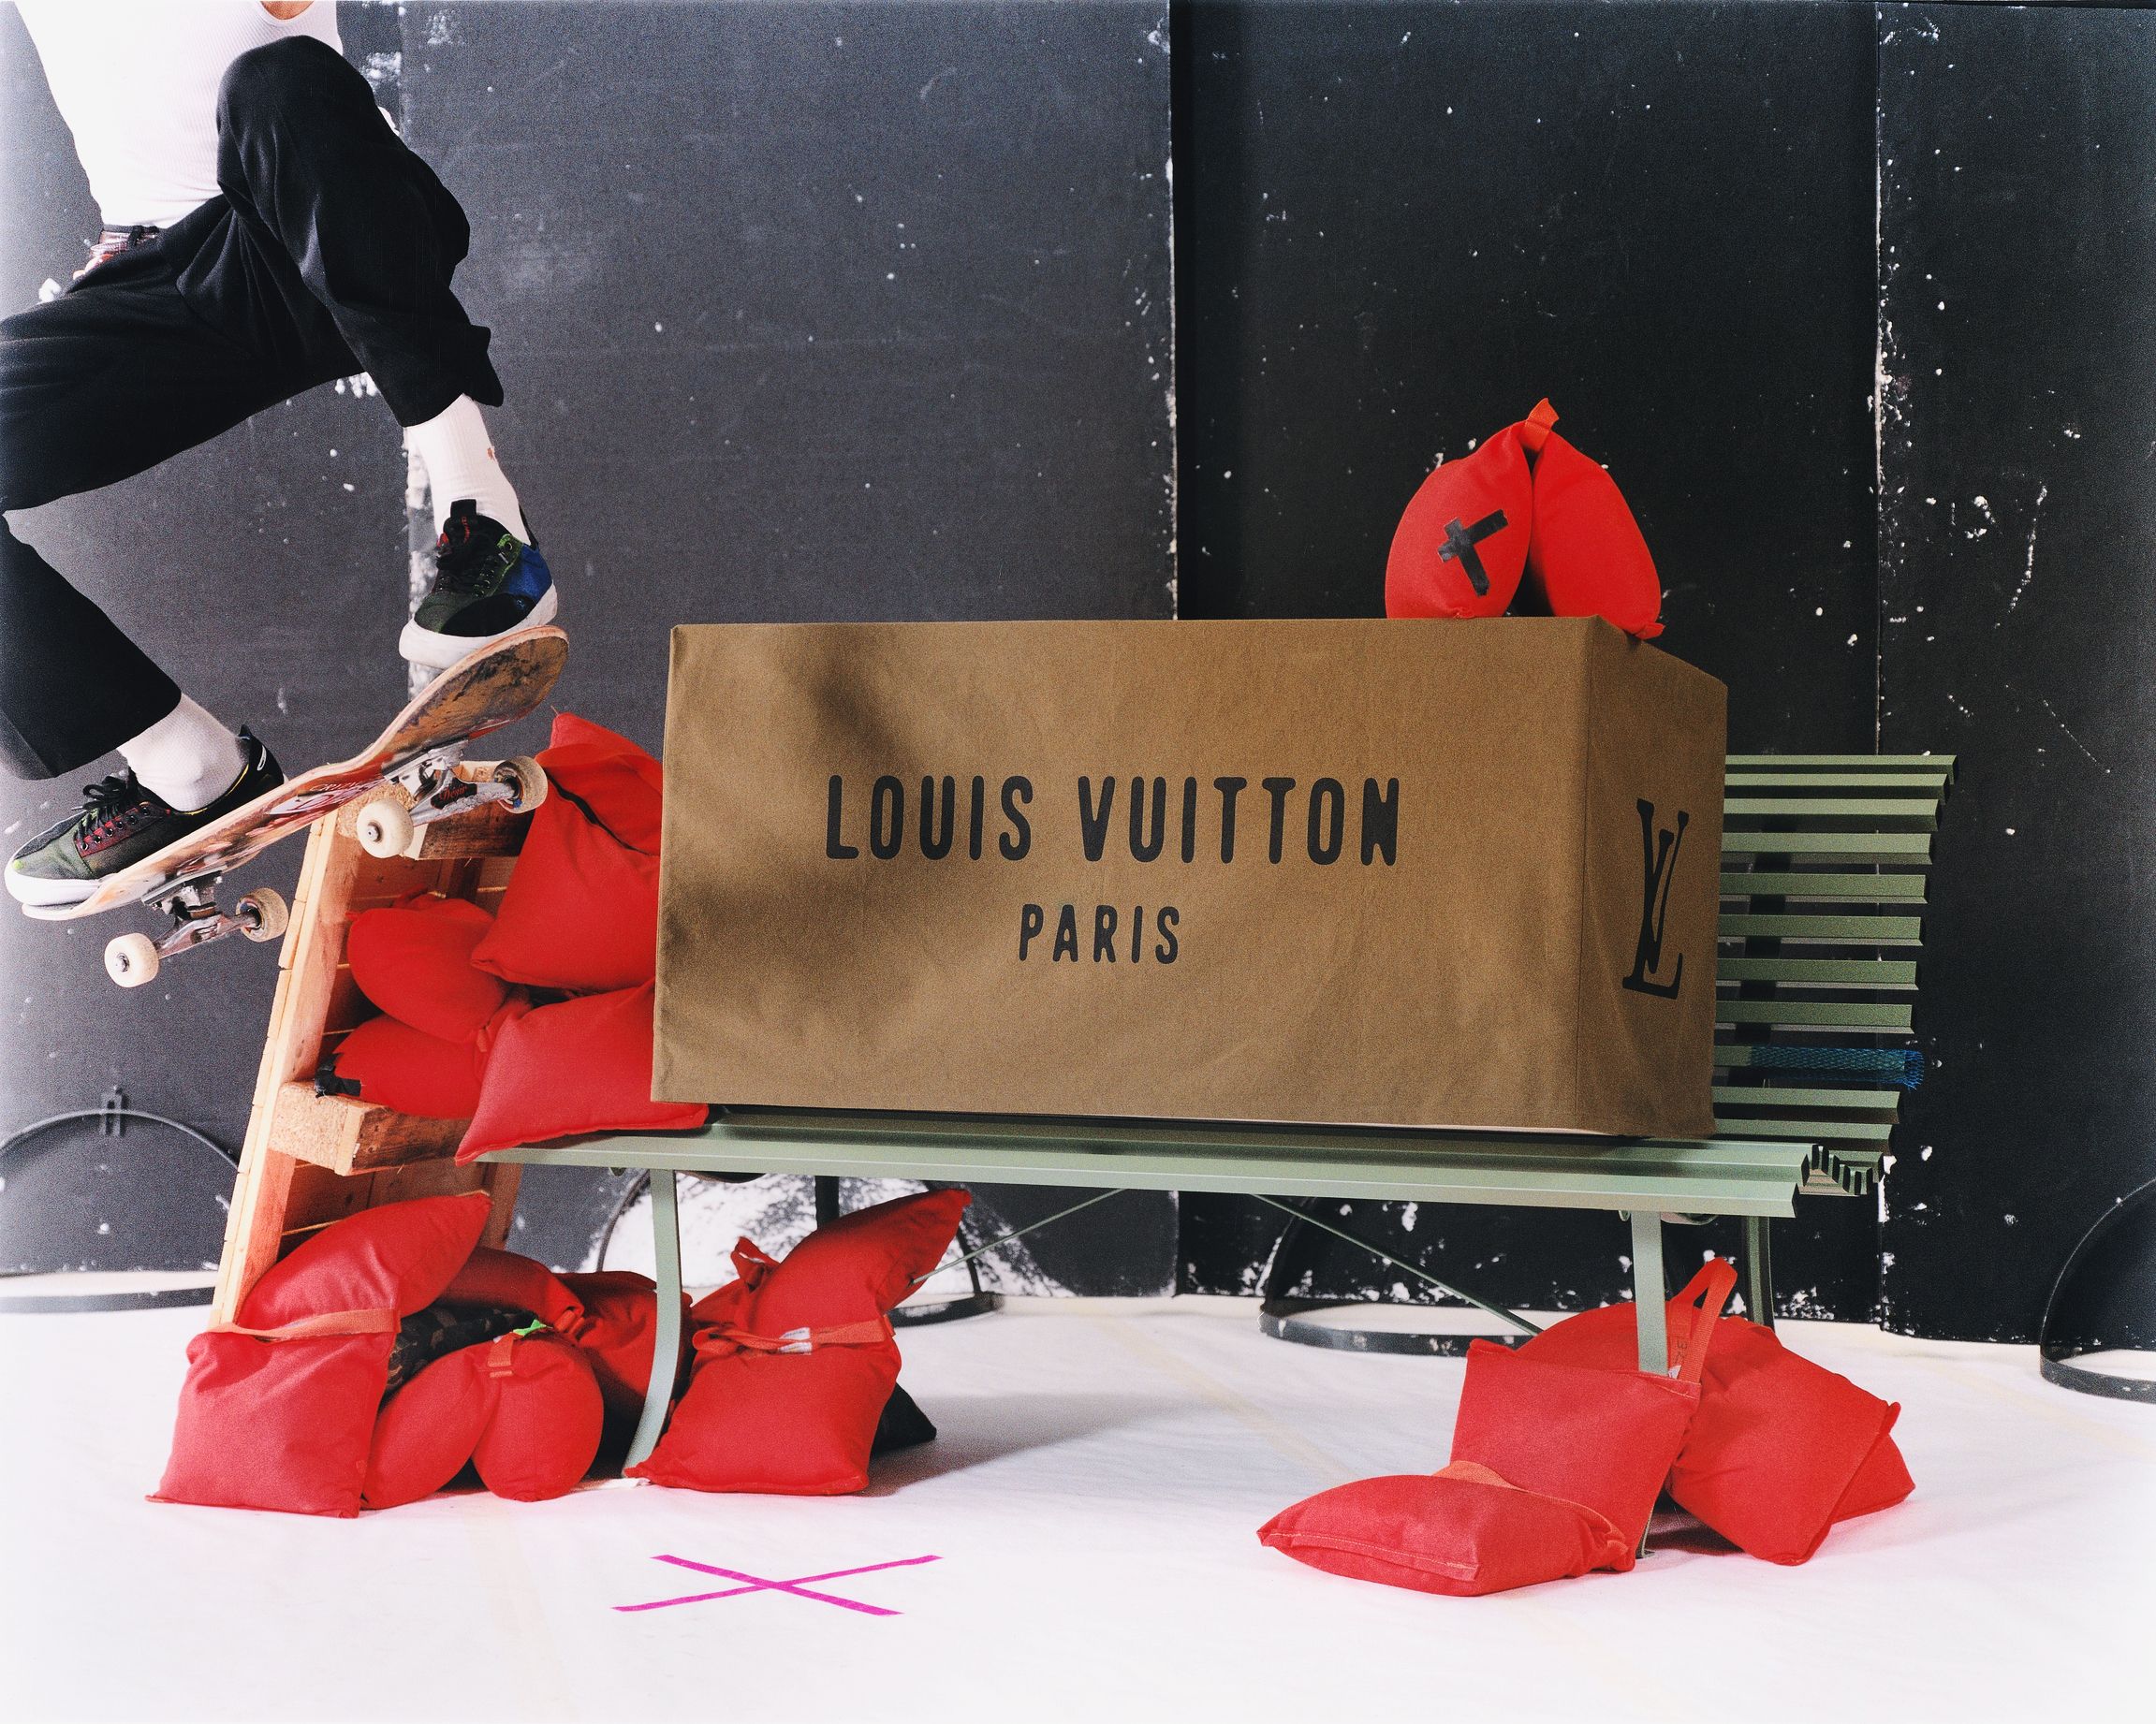 Louis Vuitton brings 200 limited-edition trunks, including one